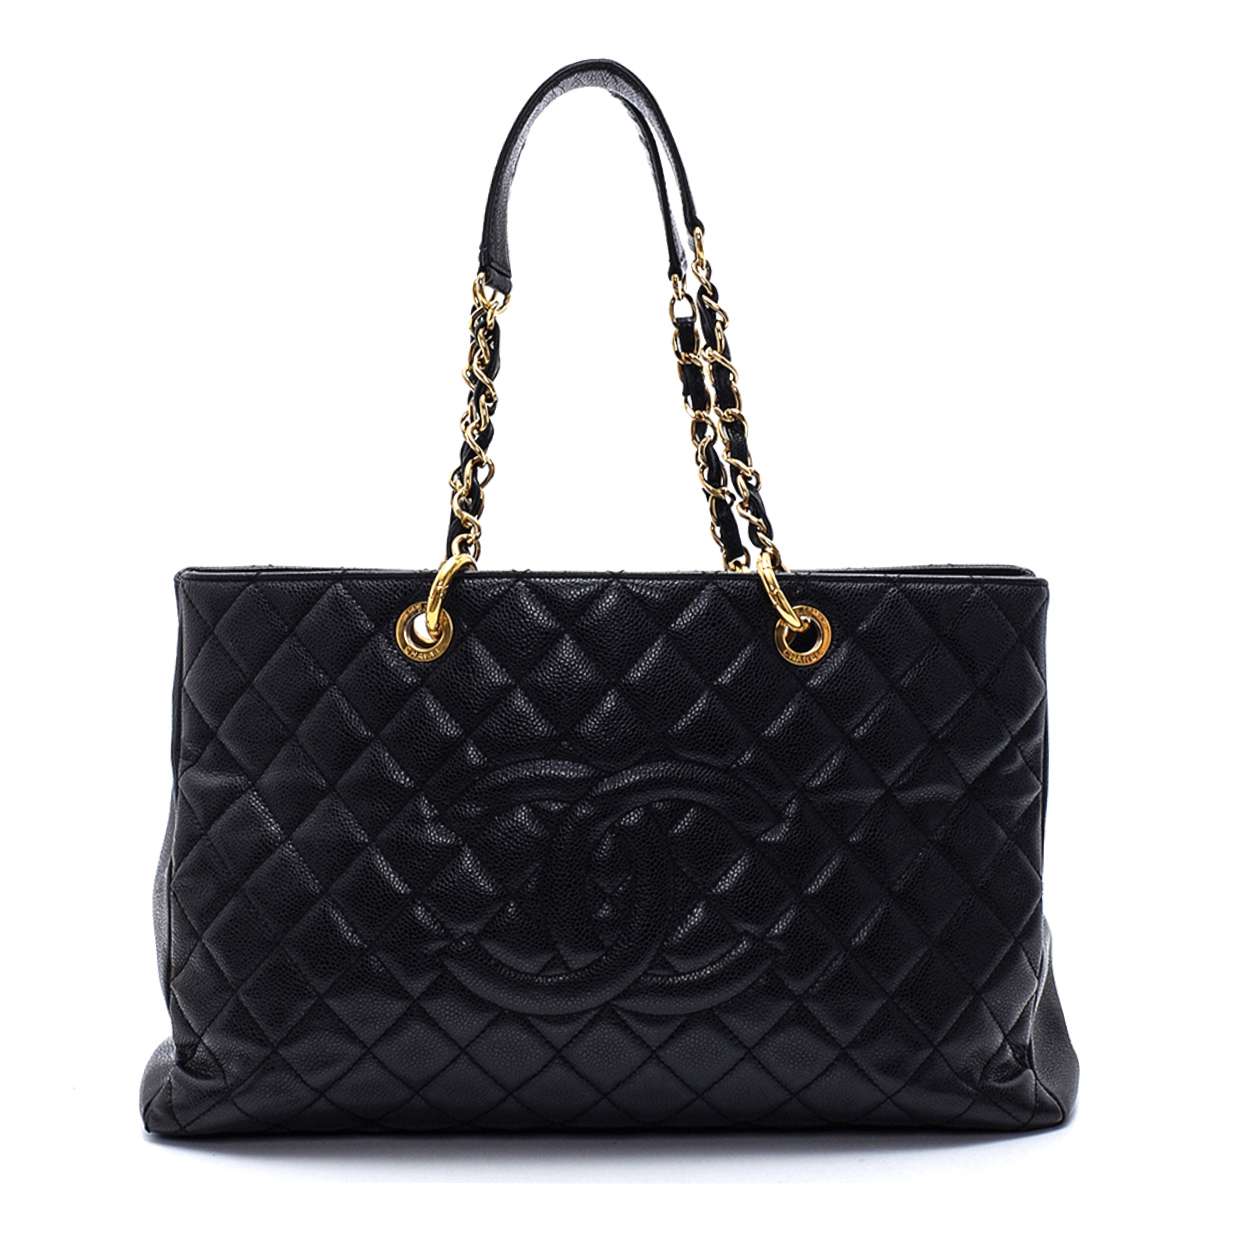 Chanel - Black Quilted Caviar Leather Grande Xlarge  Shopping Tote Bag